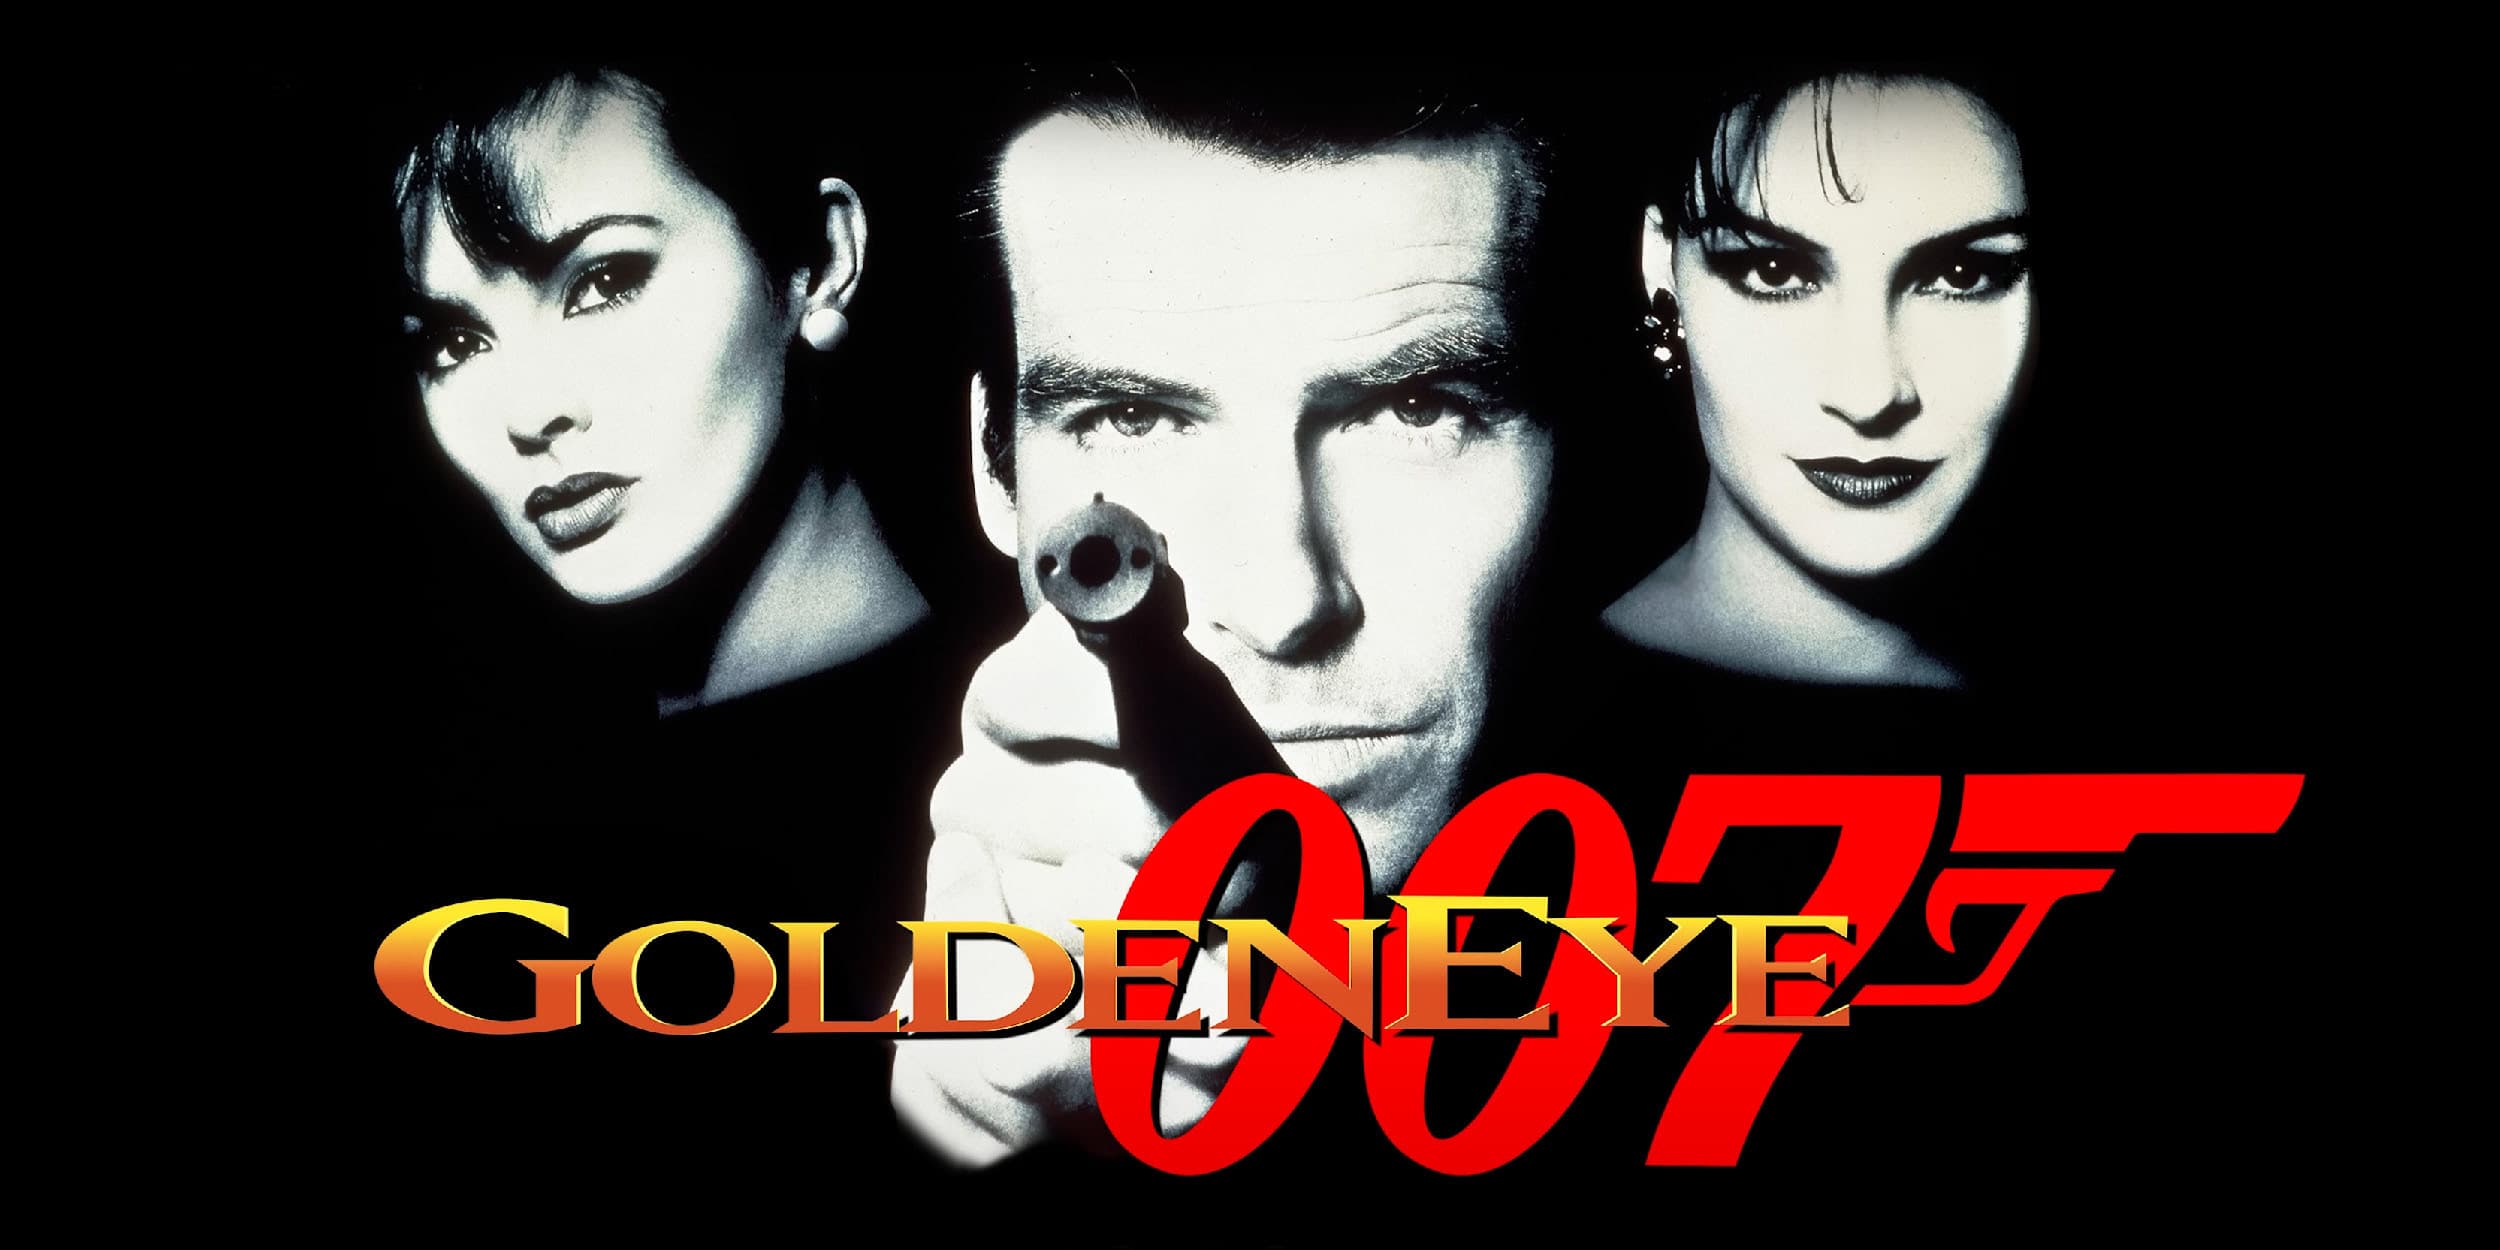 James Bond Returns as GoldenEye 007 Sets Its Sights on Xbox Game Pass